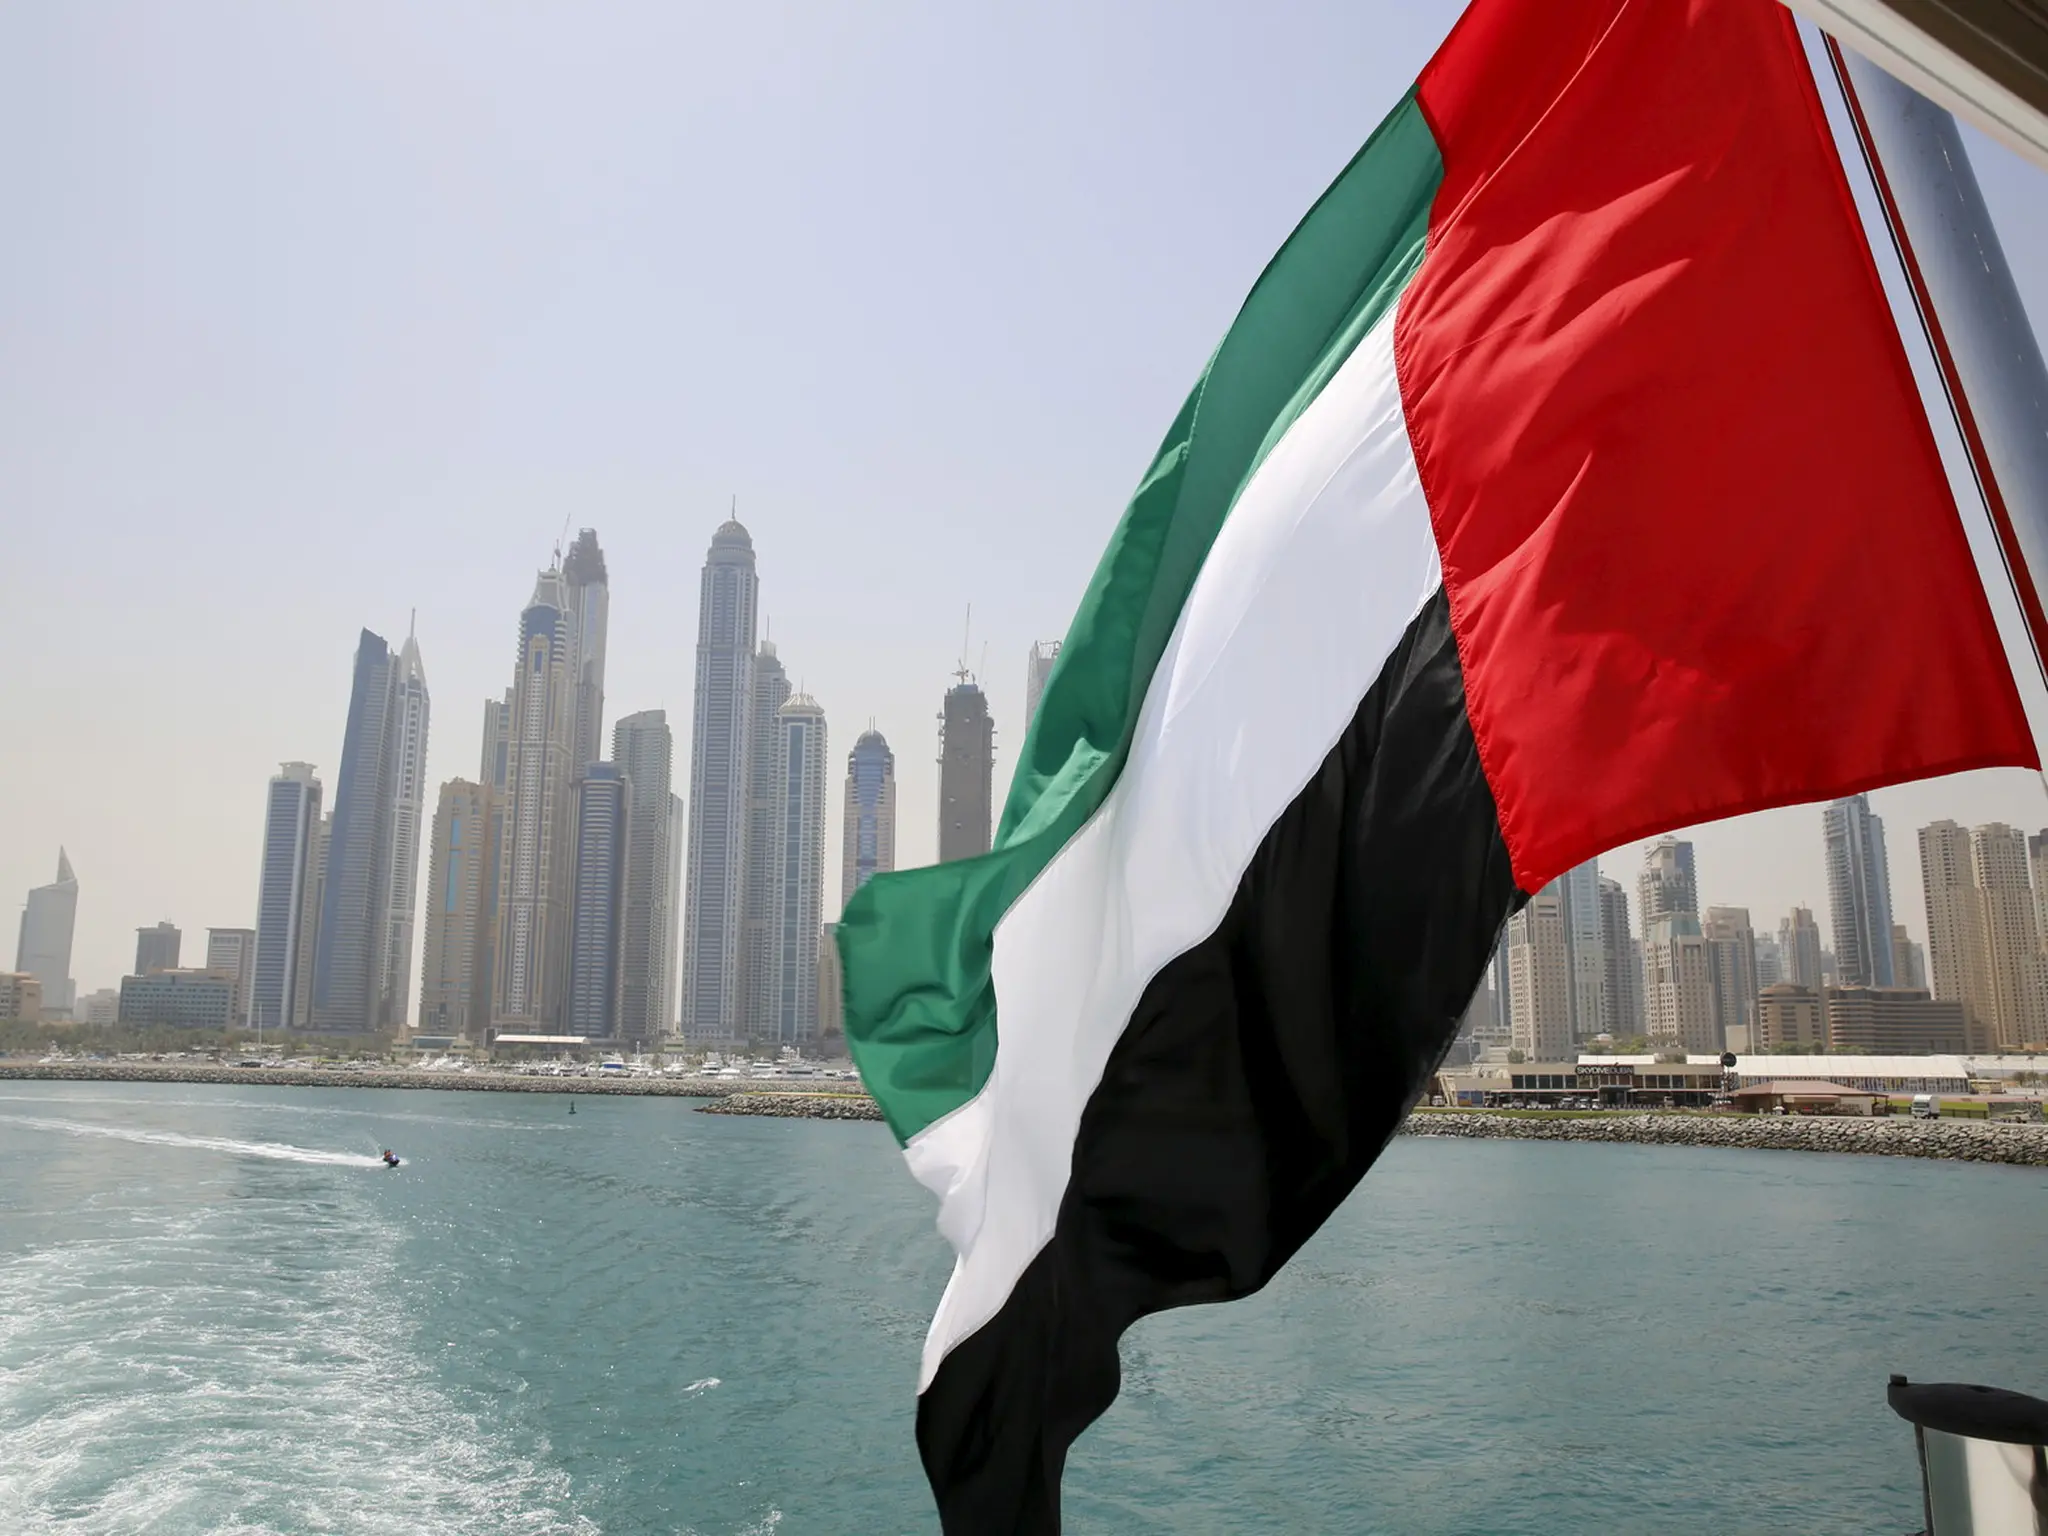 UAE: An important warning to citizens and residents, until Thursday